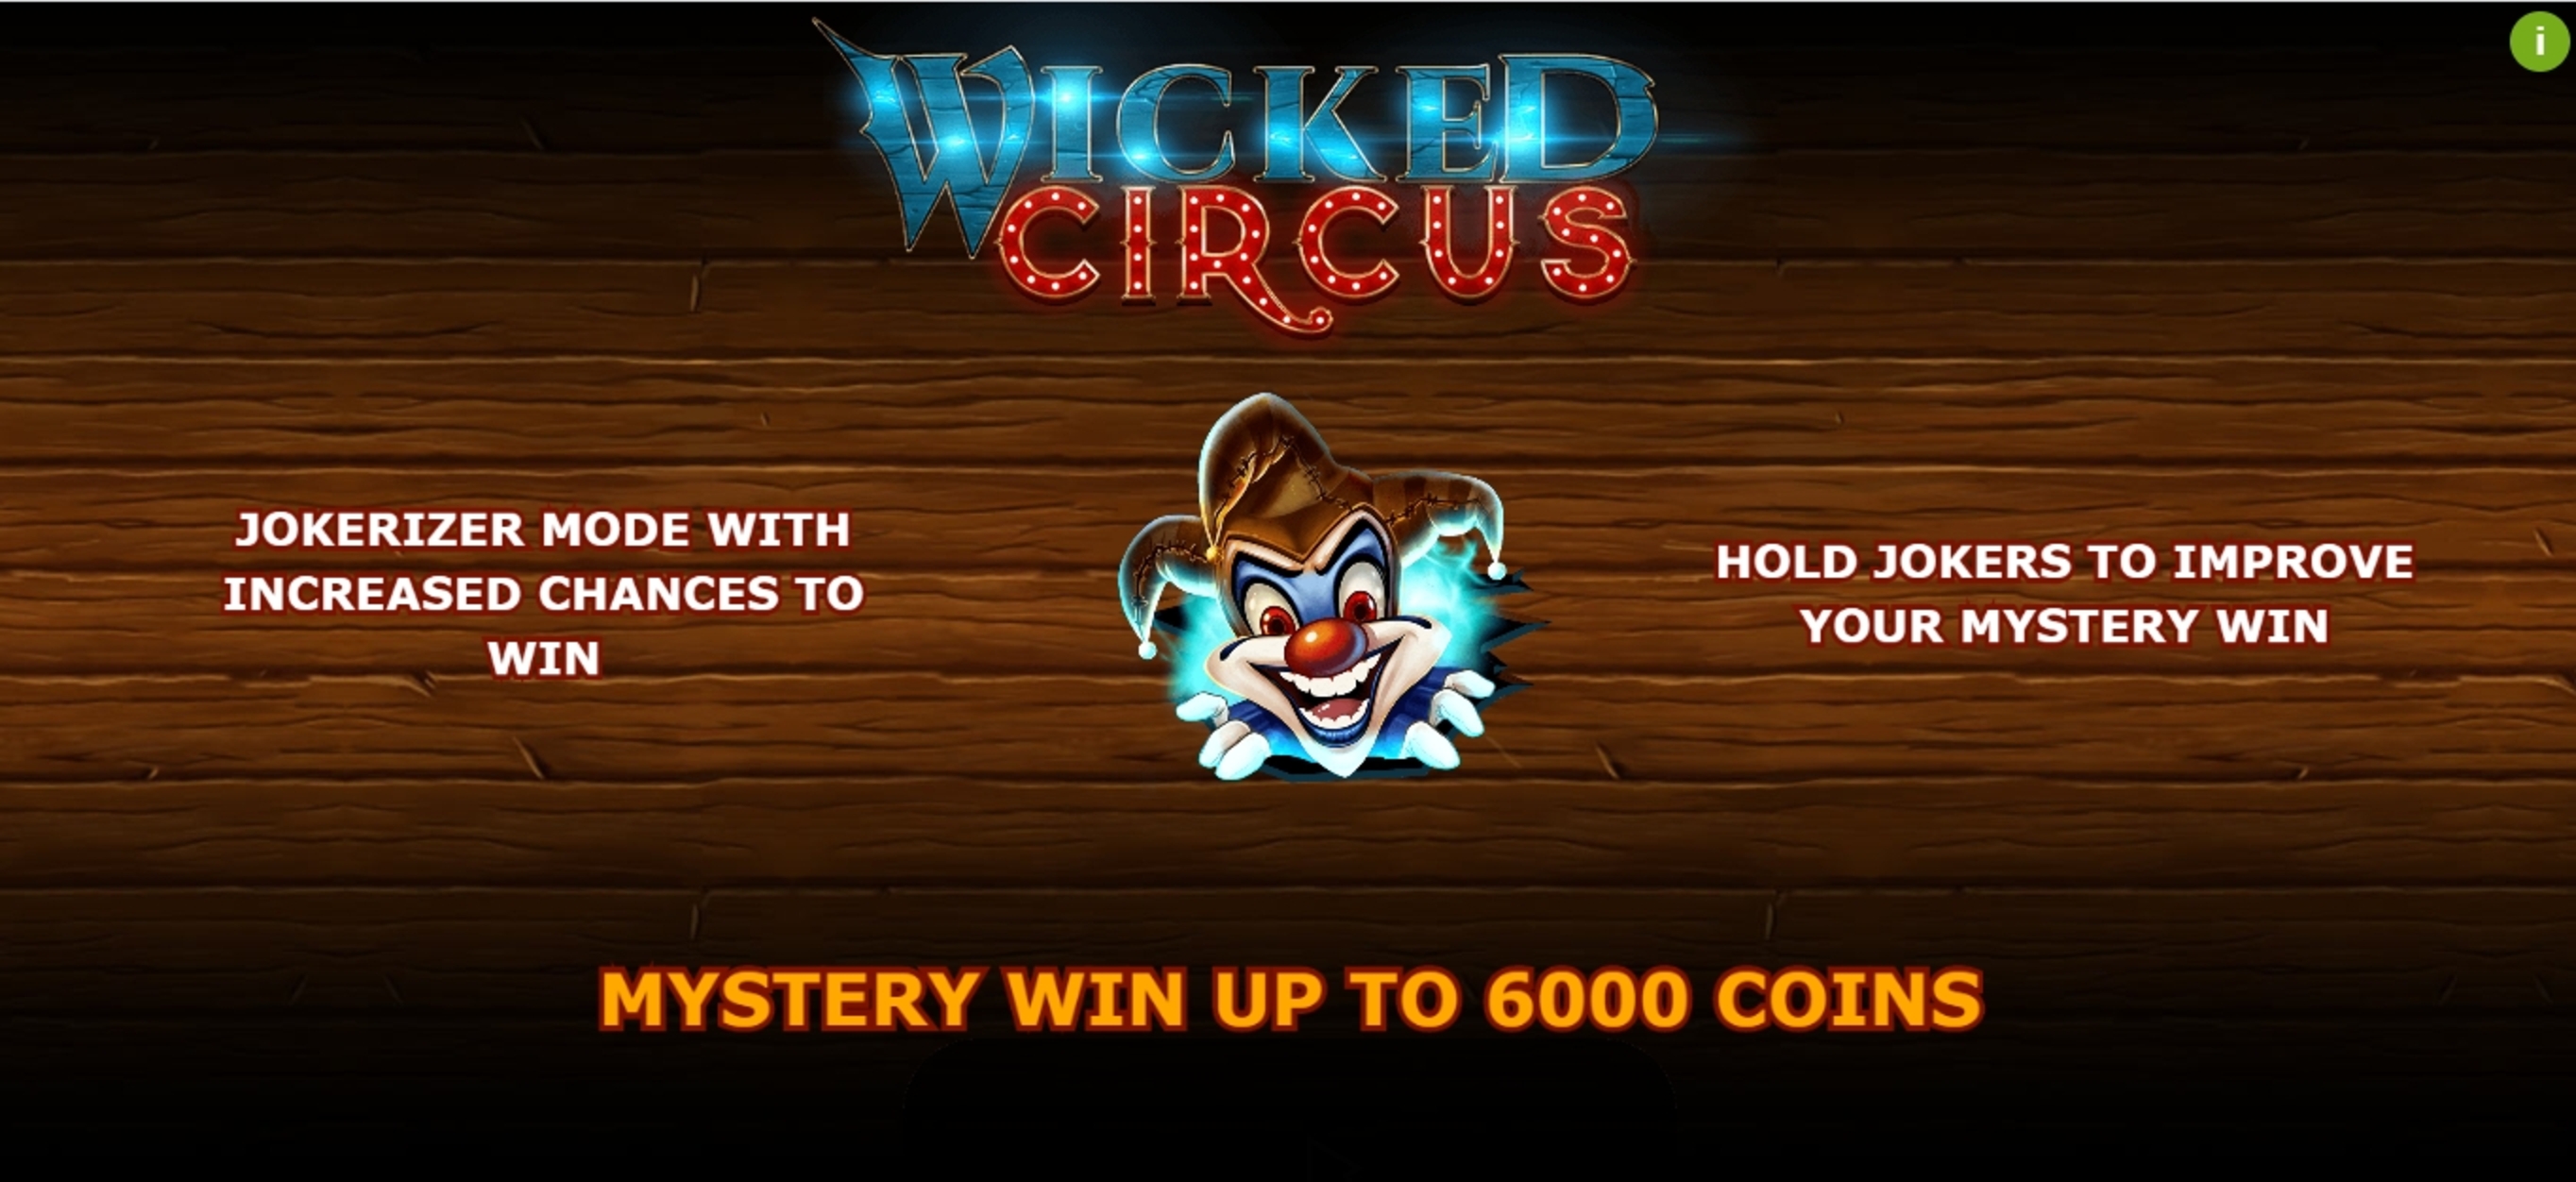 Play Wicked Circus Free Casino Slot Game by Yggdrasil Gaming